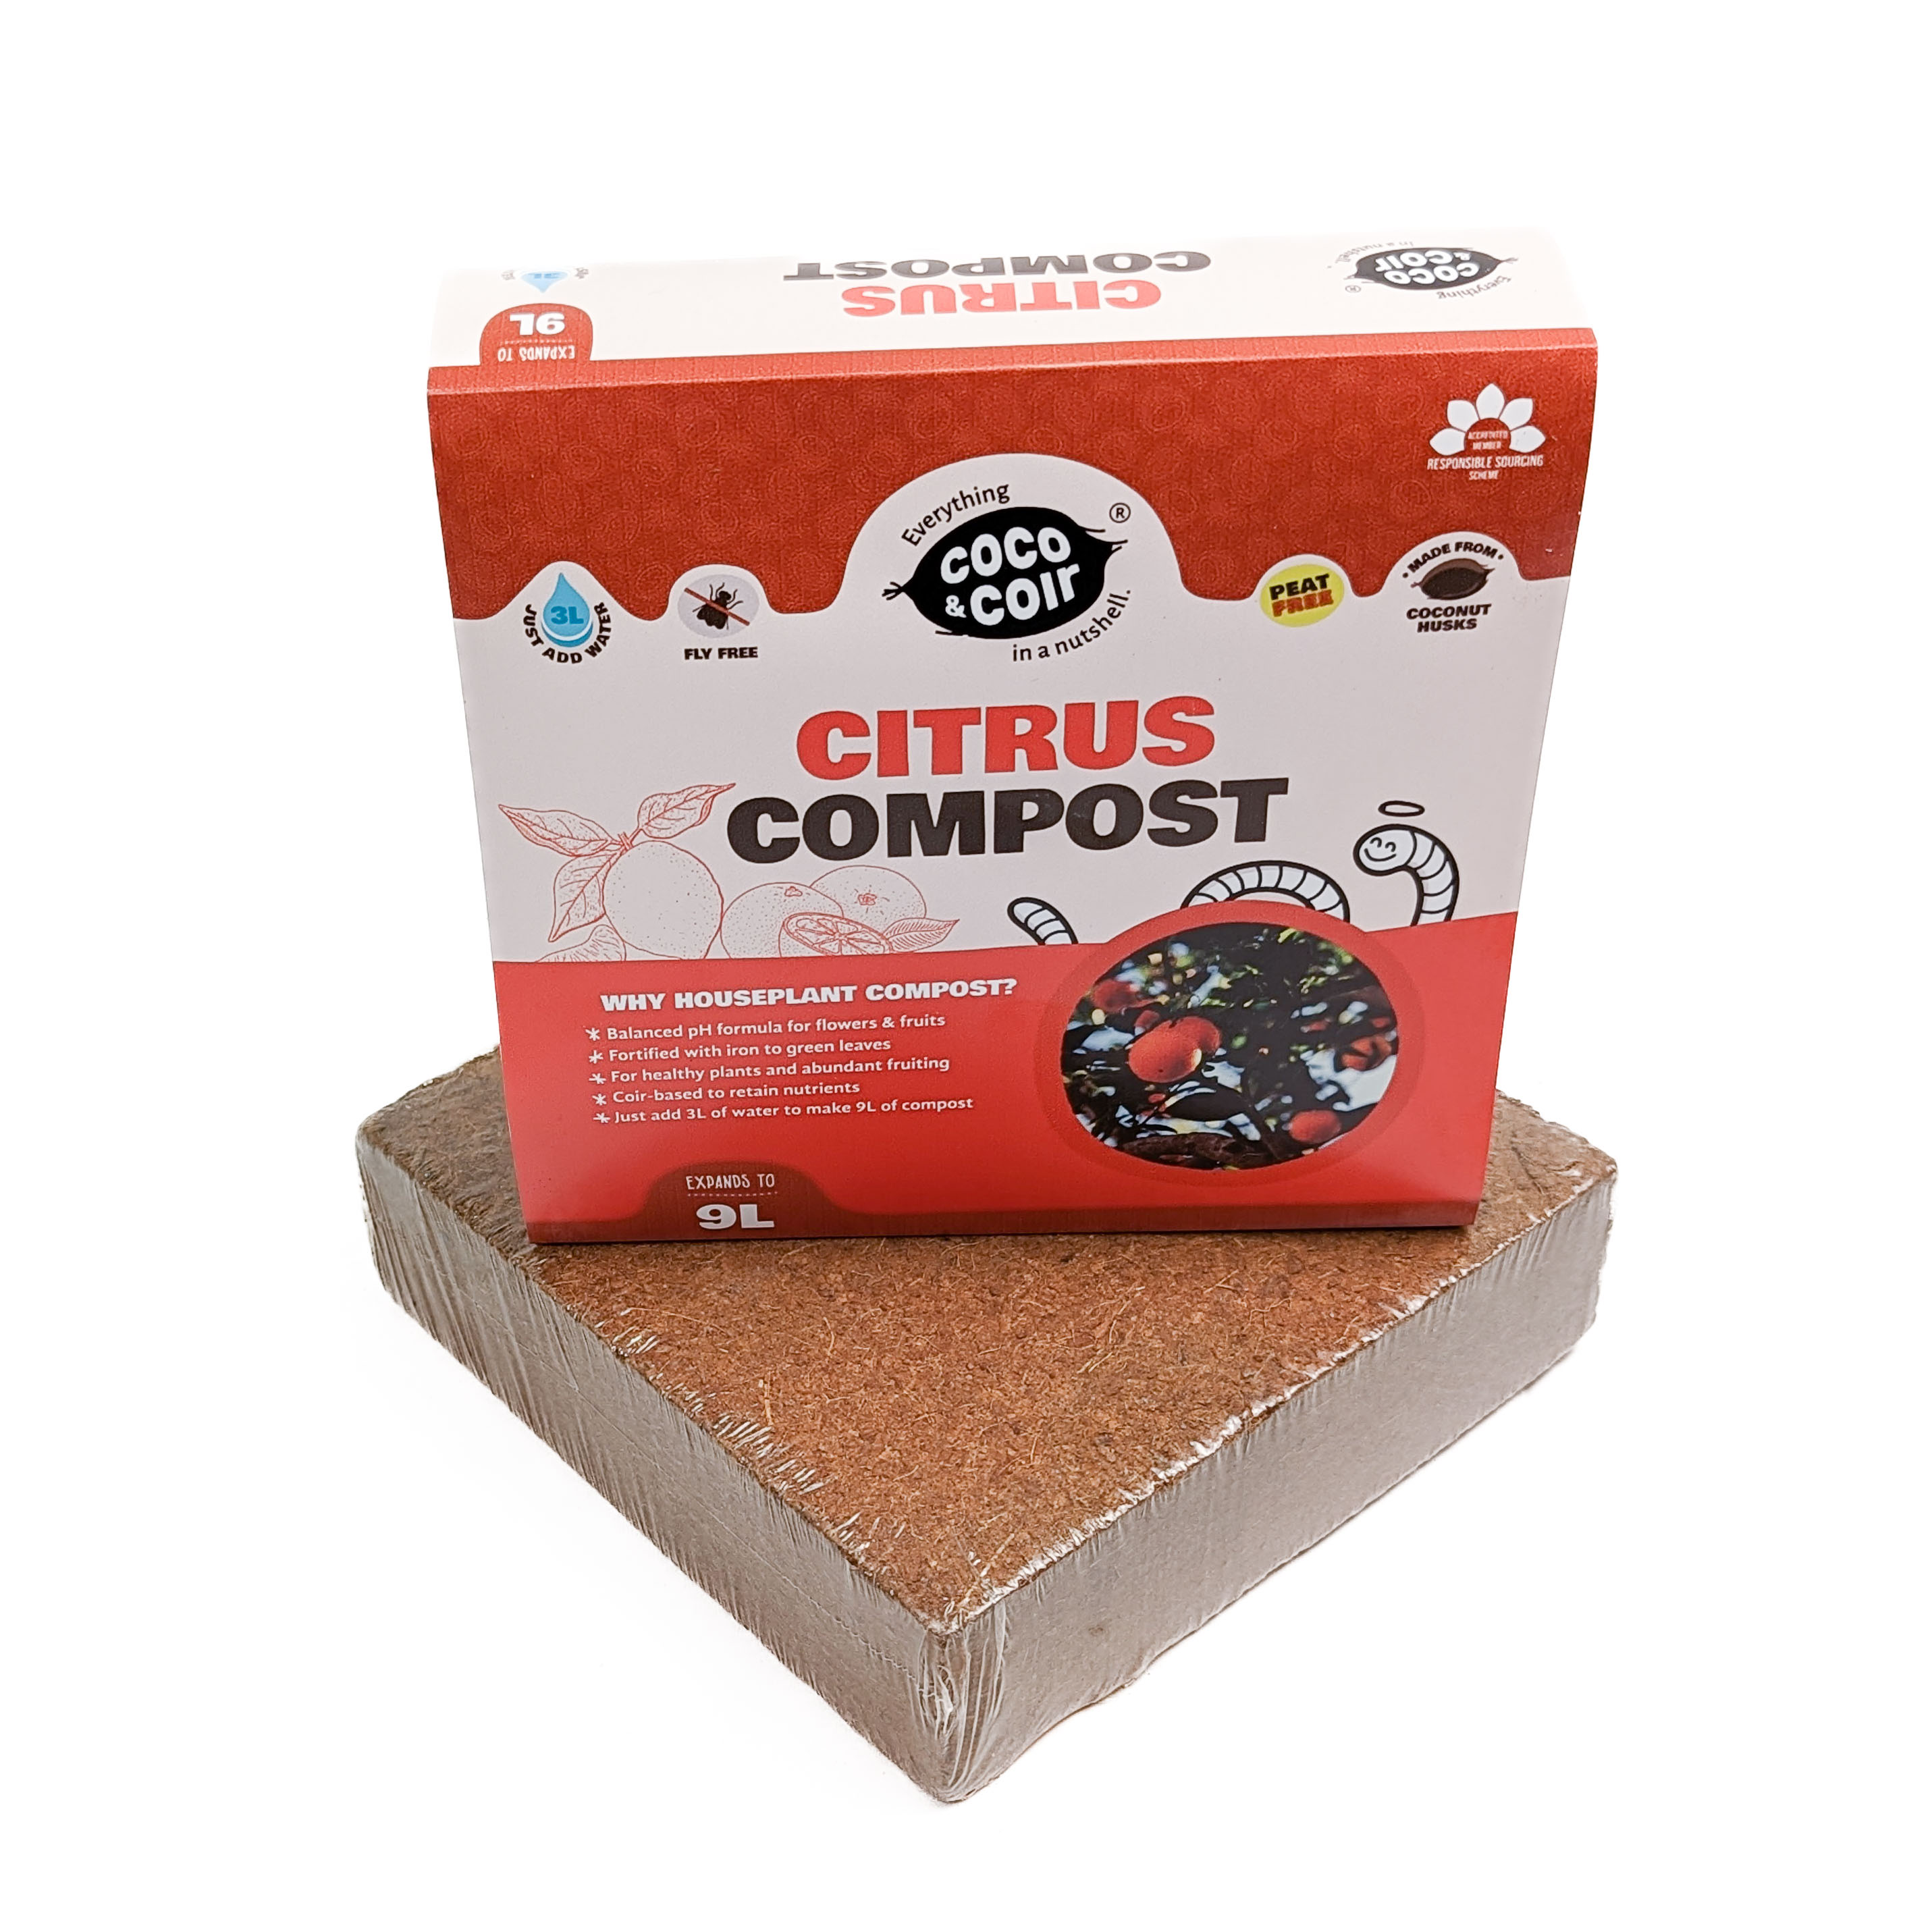 Citrus Compost (9L) - Coir With Iron Enriched Plant Feed